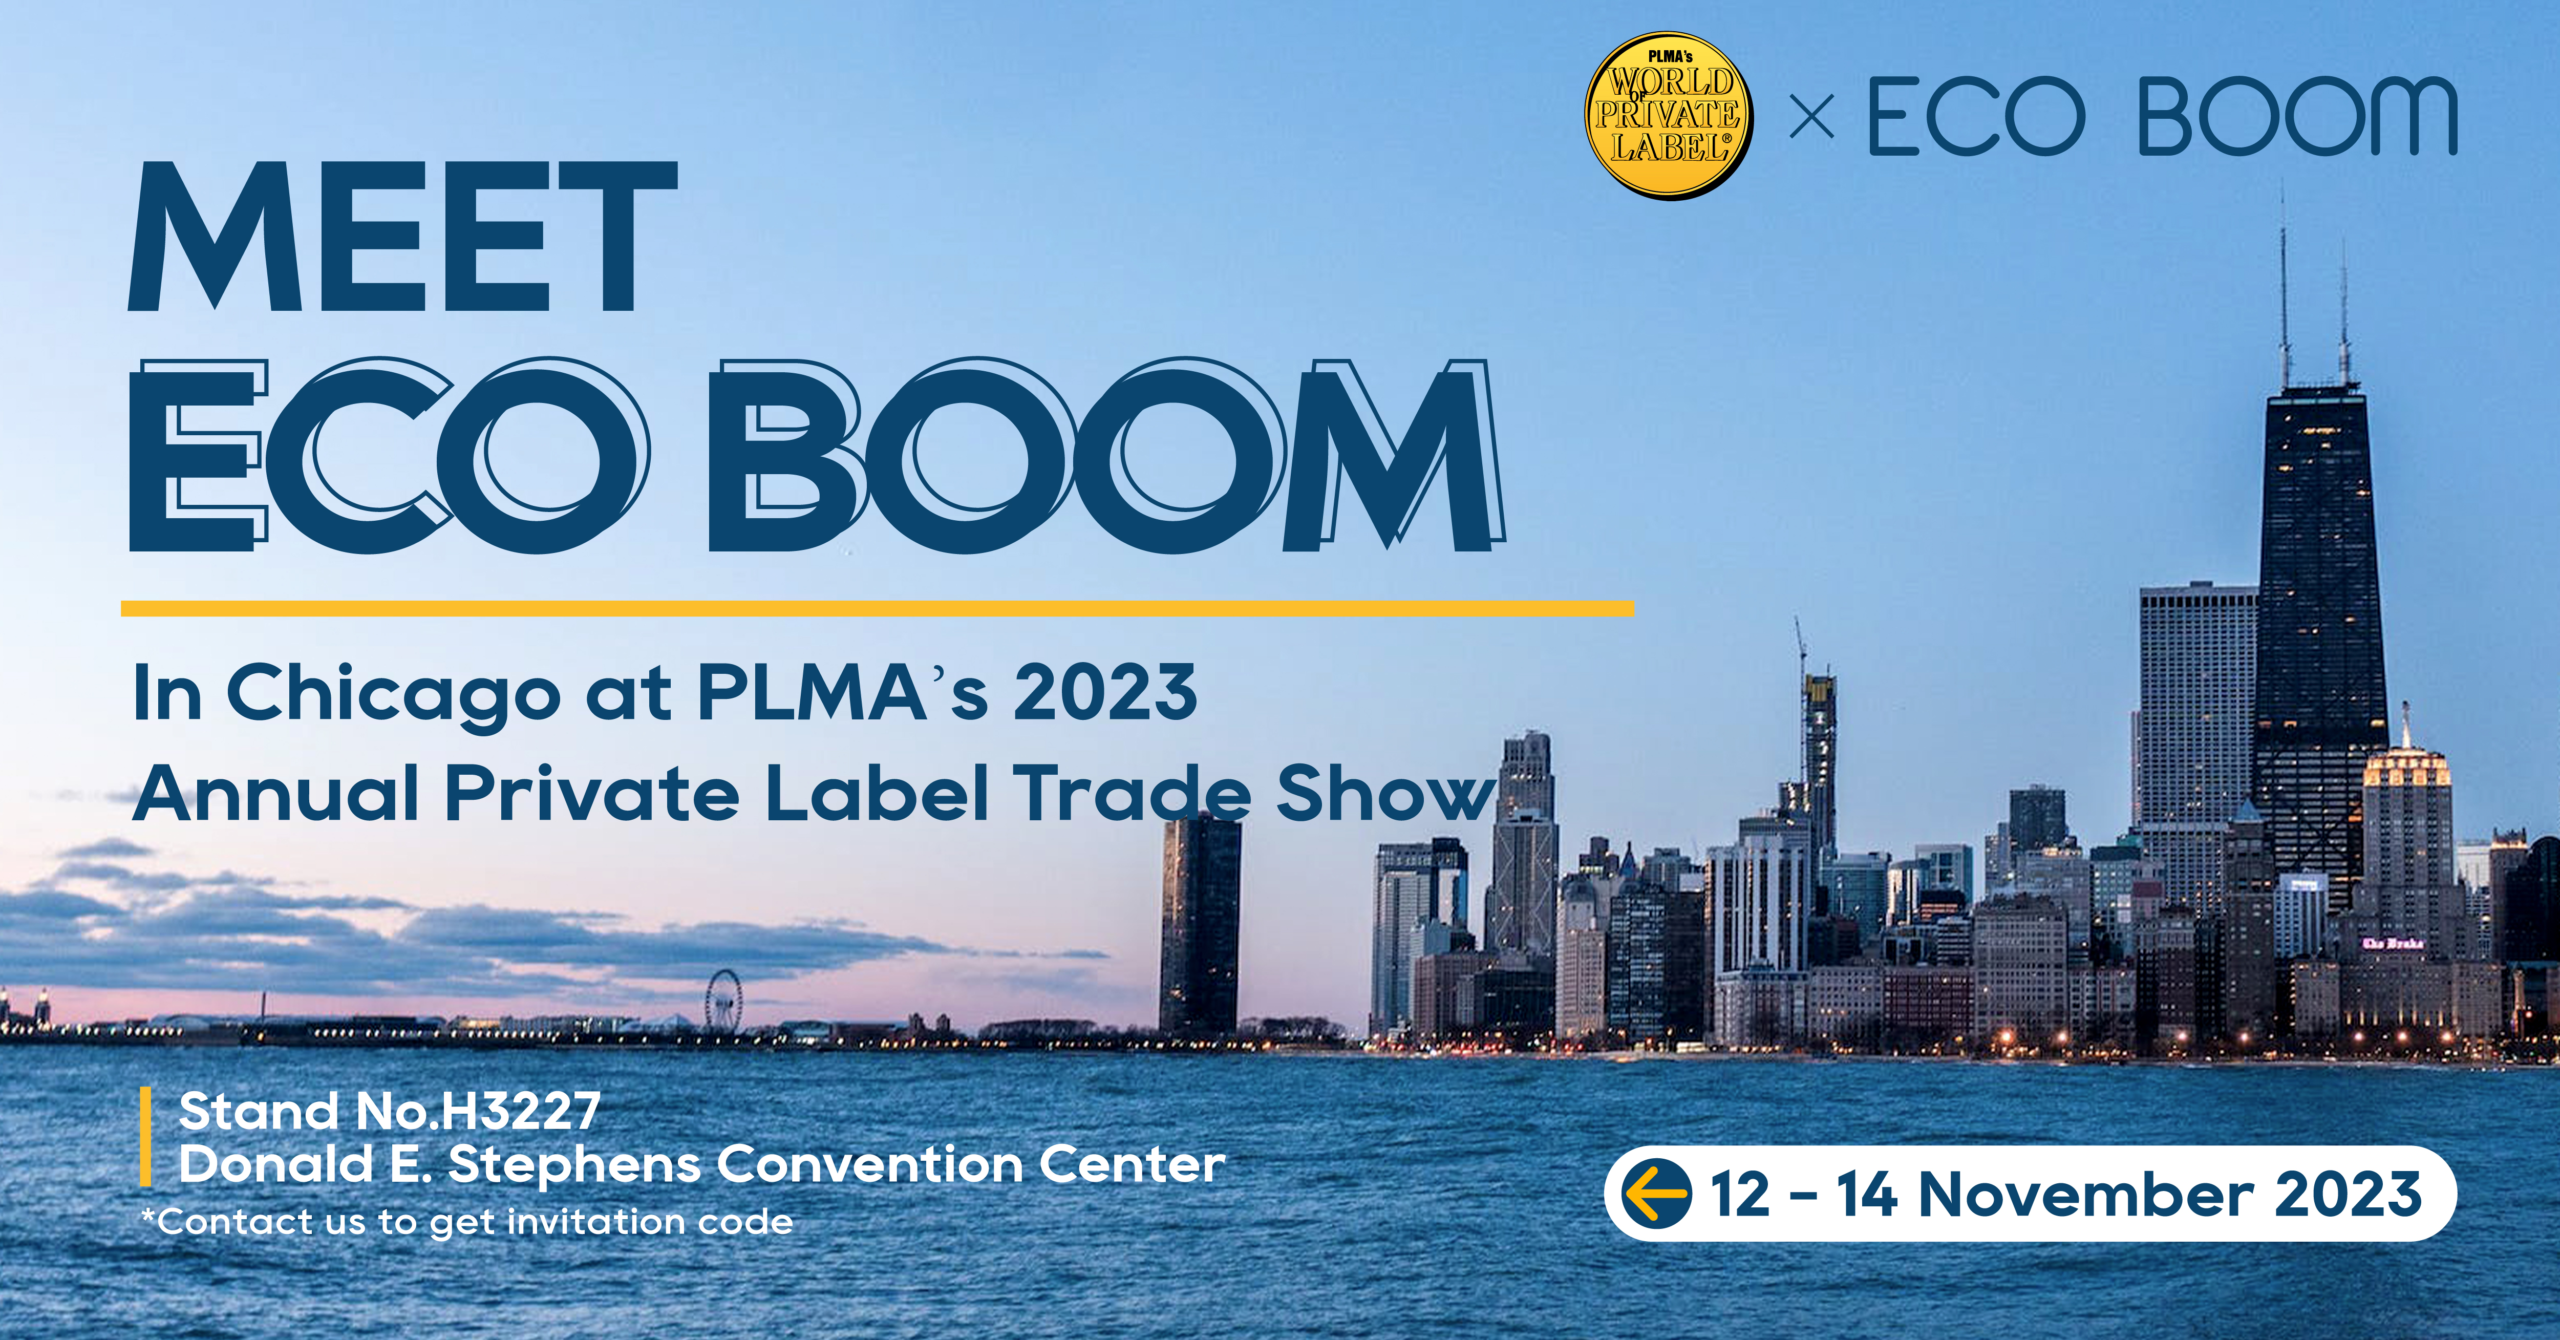 See you at PLMA's 2023 Private Label Trade Show! Together we can make changes!